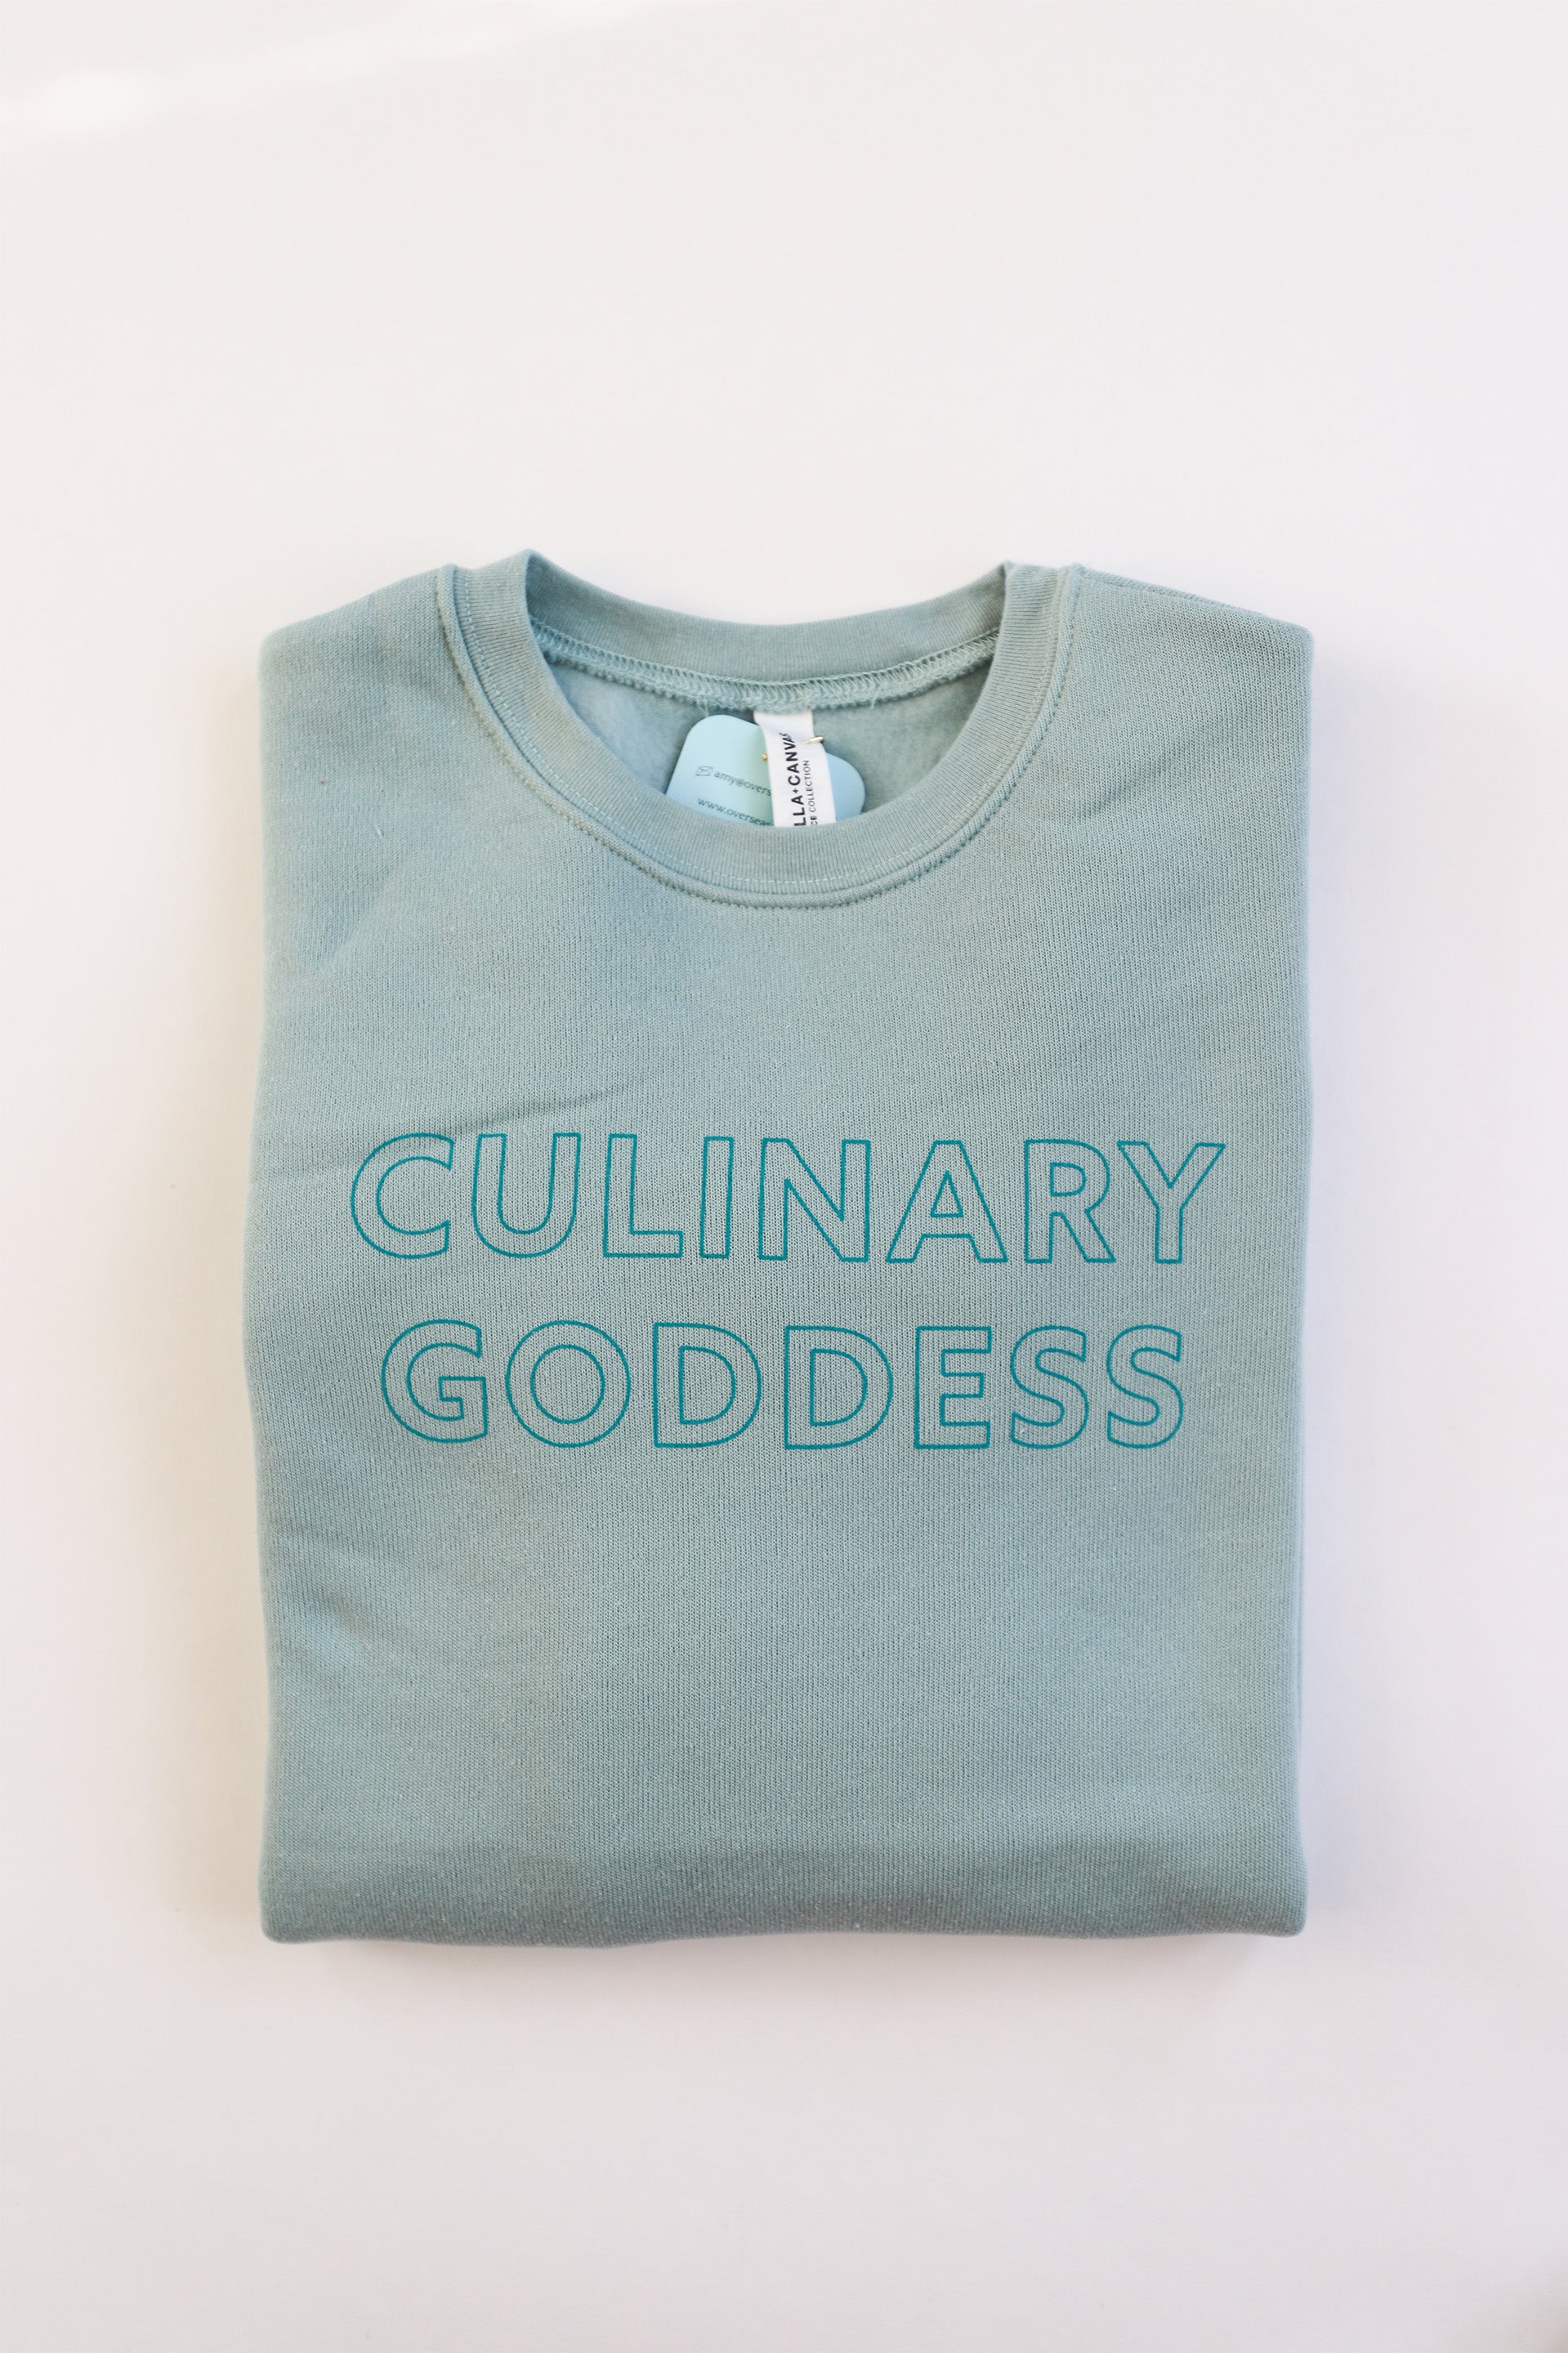 Folded dusty blue crewneck with "Culinary Goddess" in teal block lettering